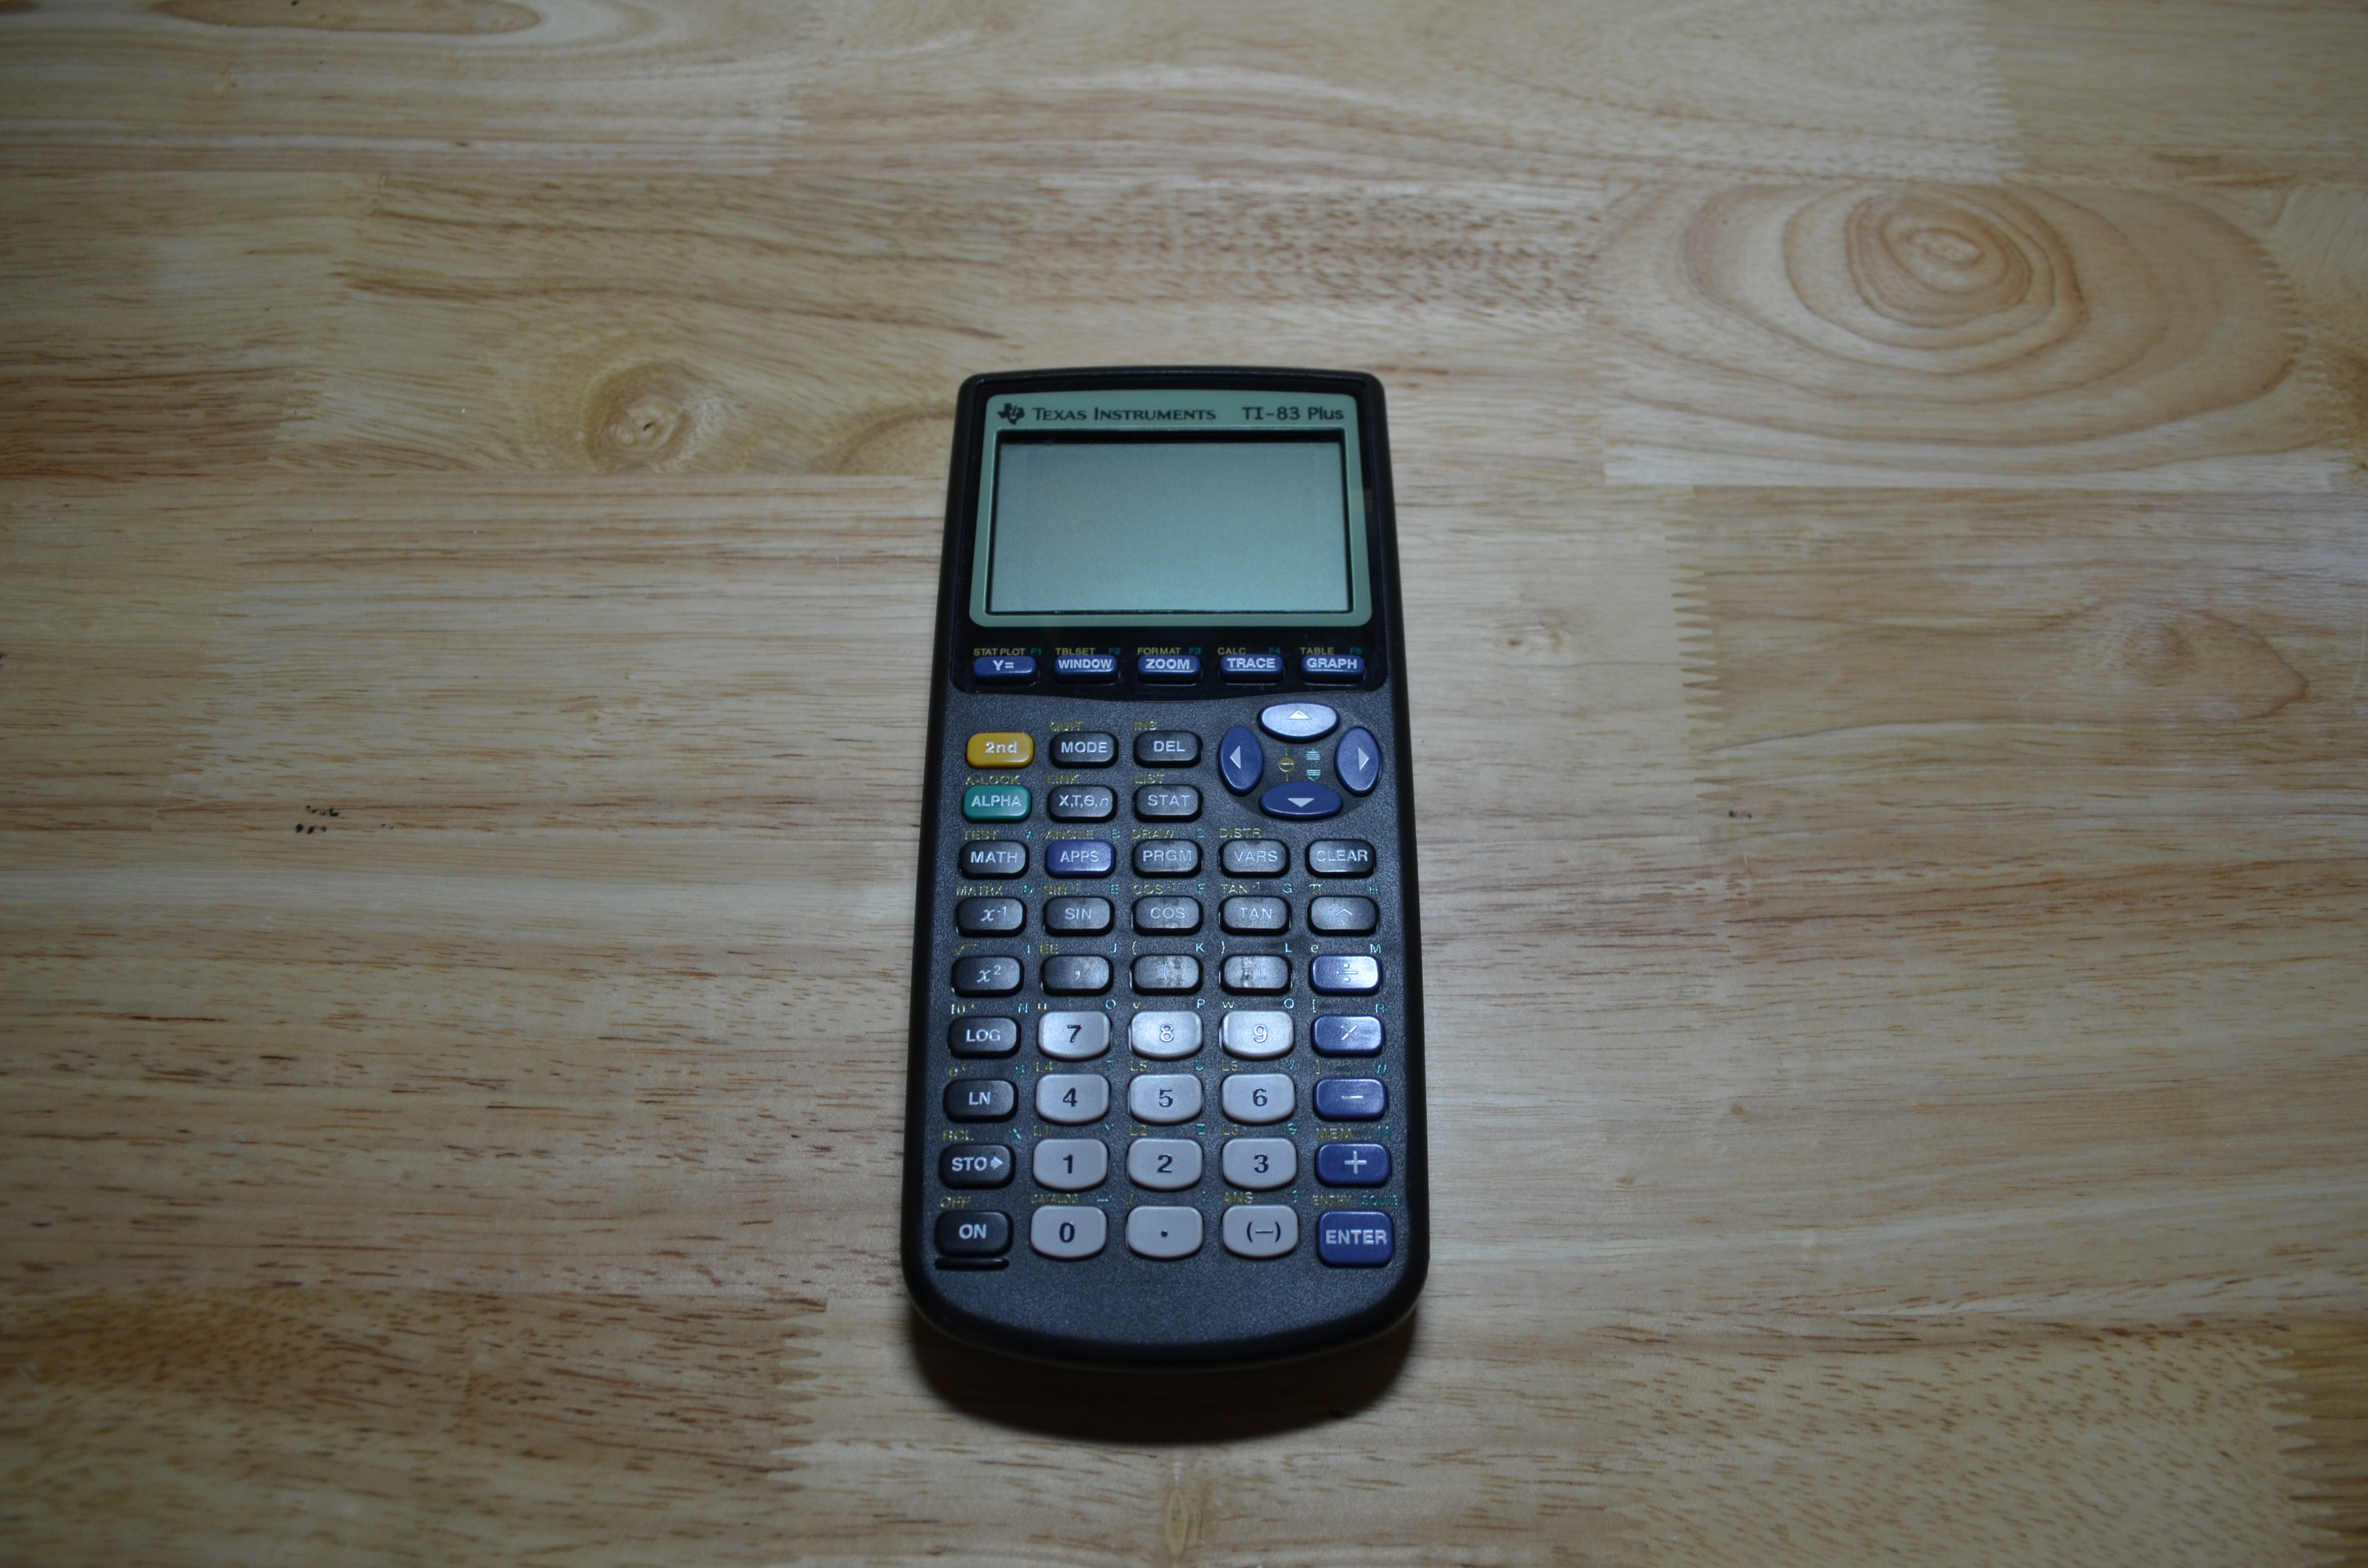 The front of the TI-83